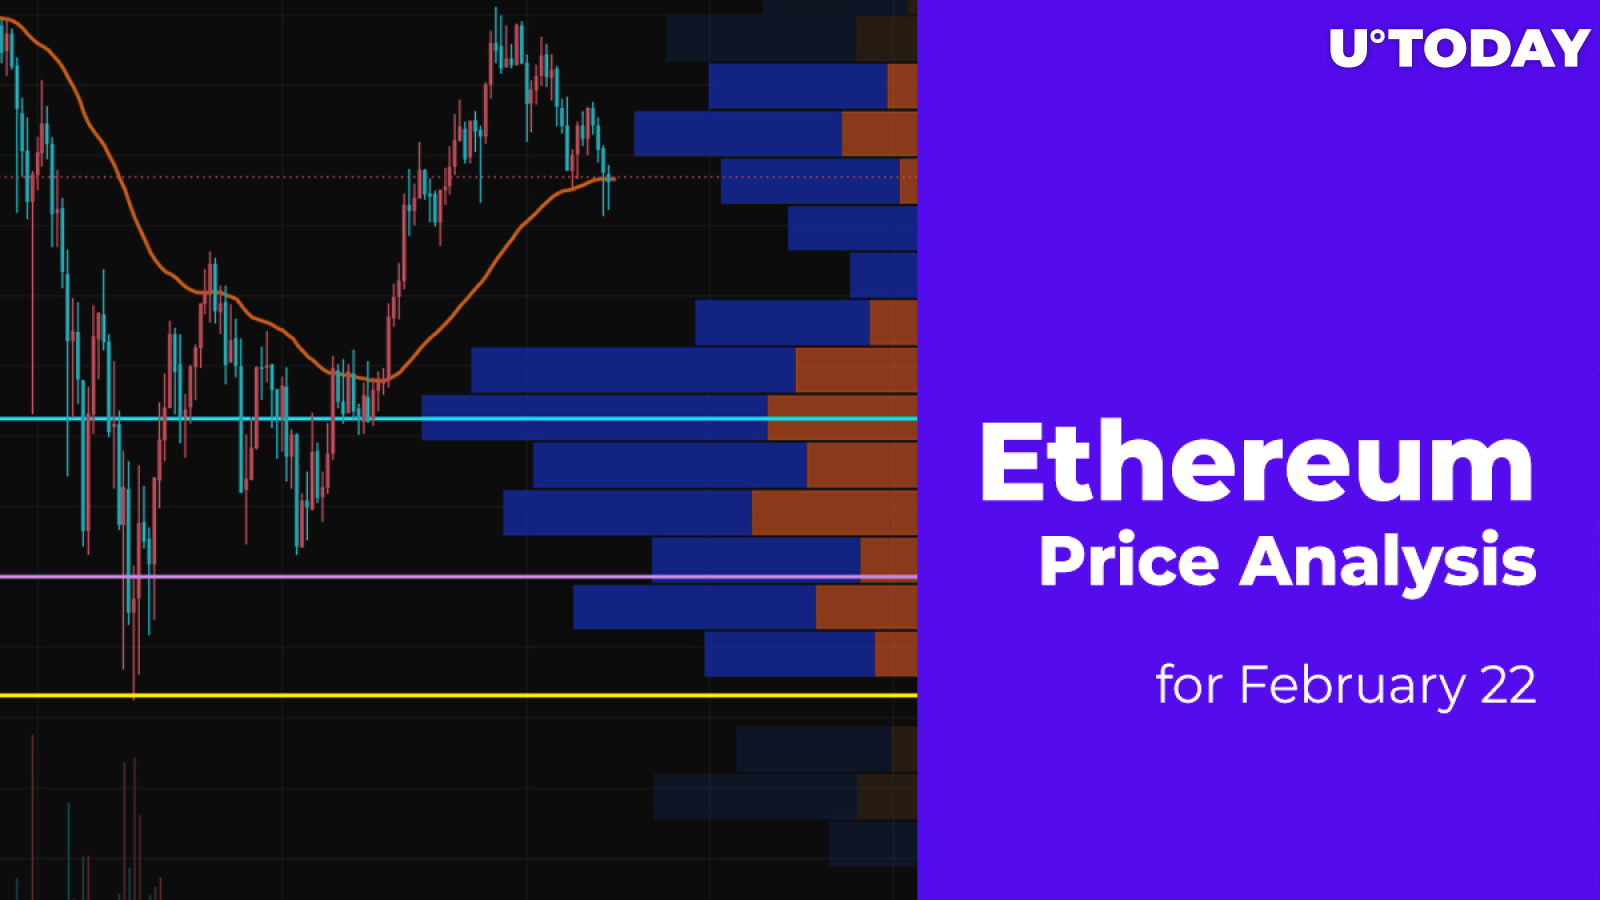 Ethereum (ETH) Price Analysis for February 22